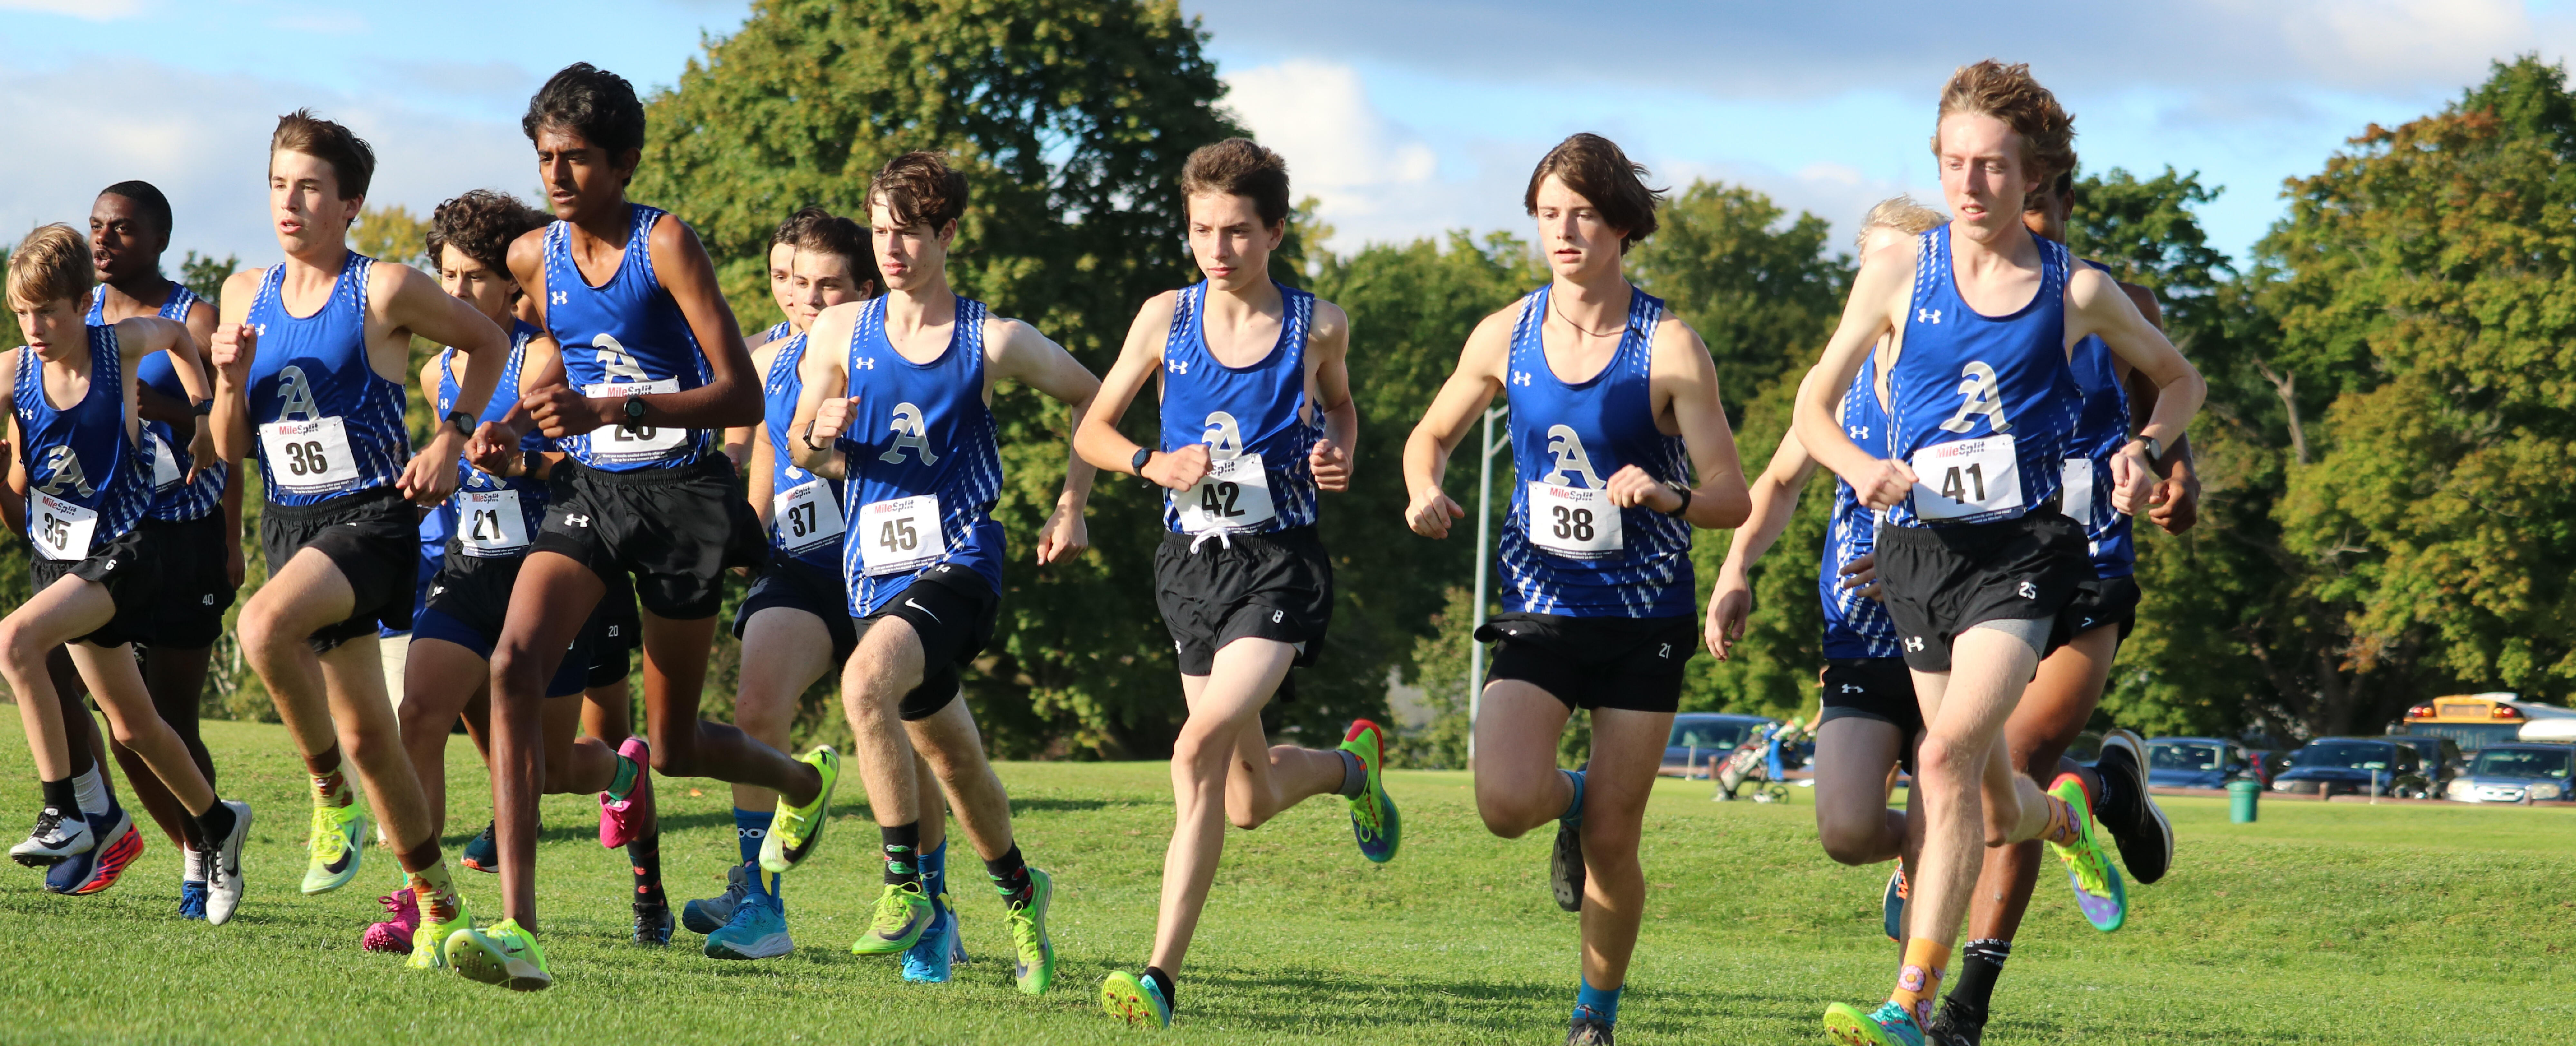 Albany High cross country runners beginning a race